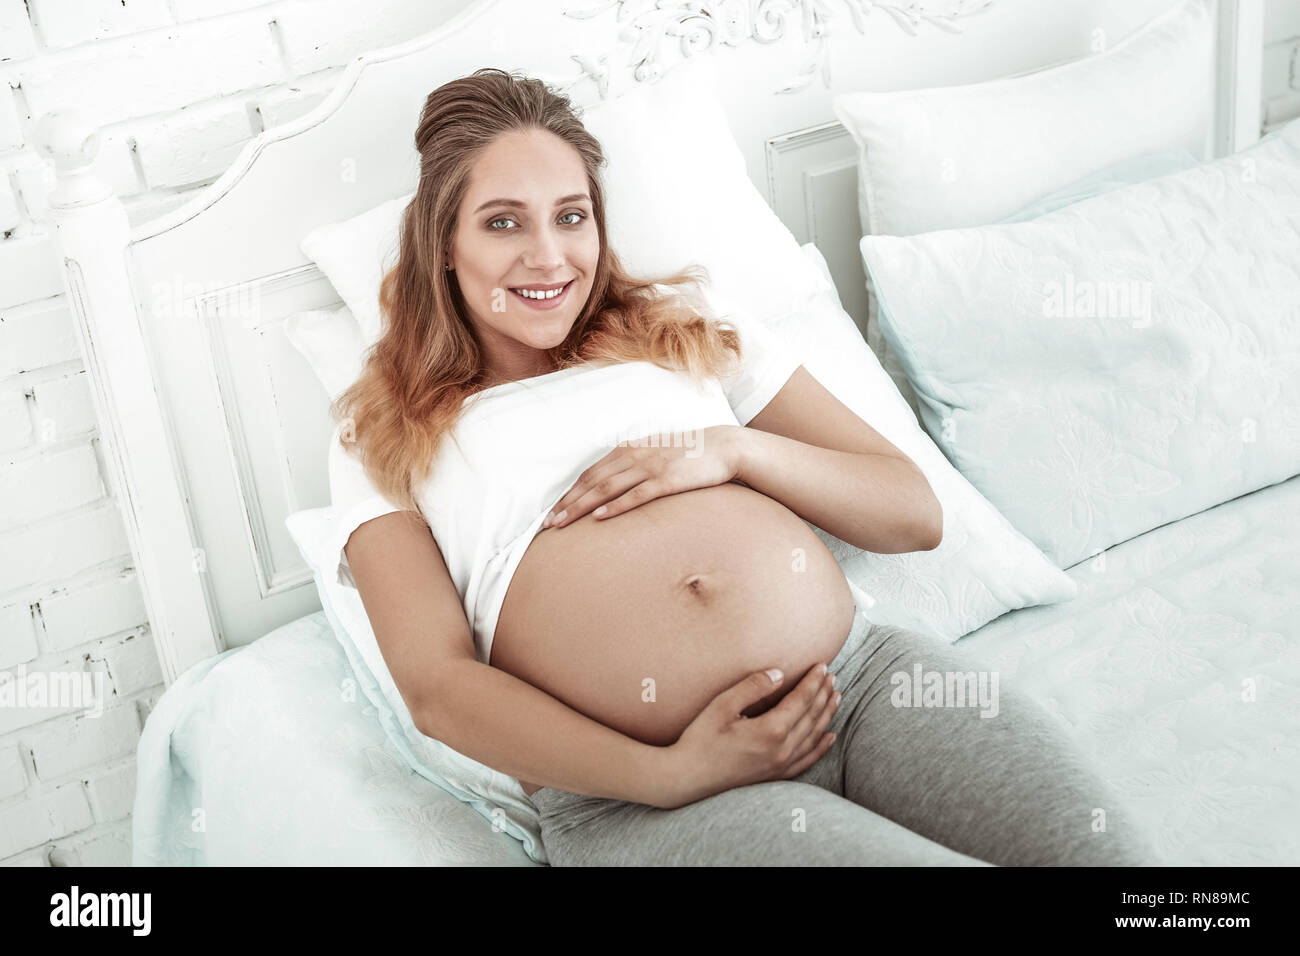 Pleasant woman with wide smile wrapping pregnant belly Stock Photo